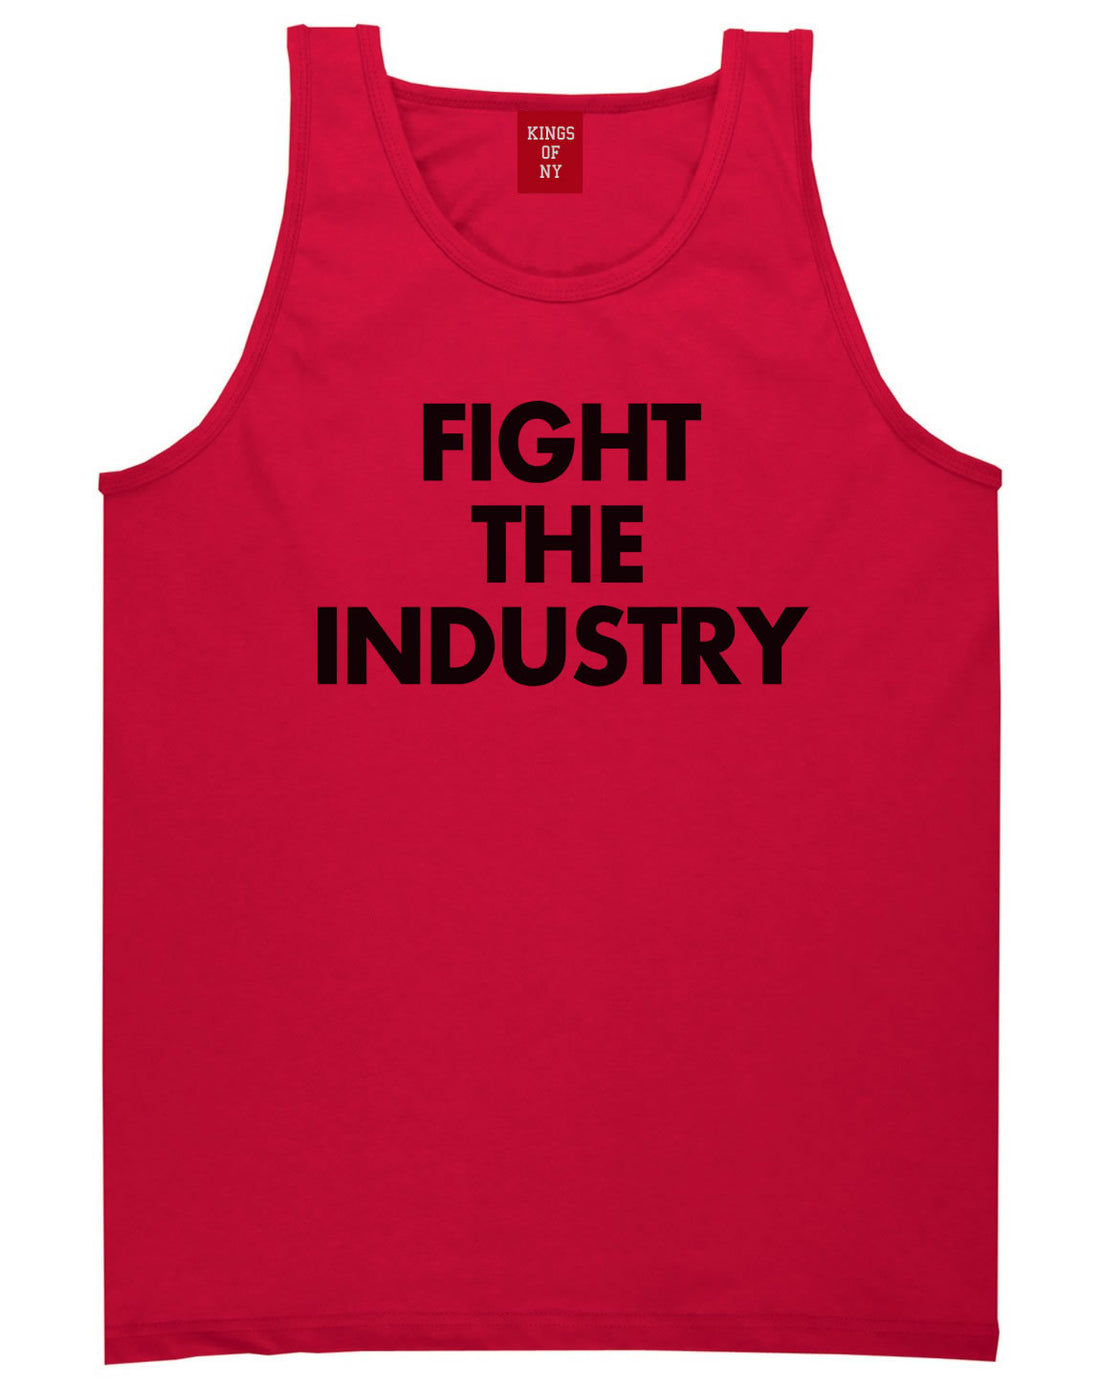 Fight The Industry Power Tank Top in Red By Kings Of NY